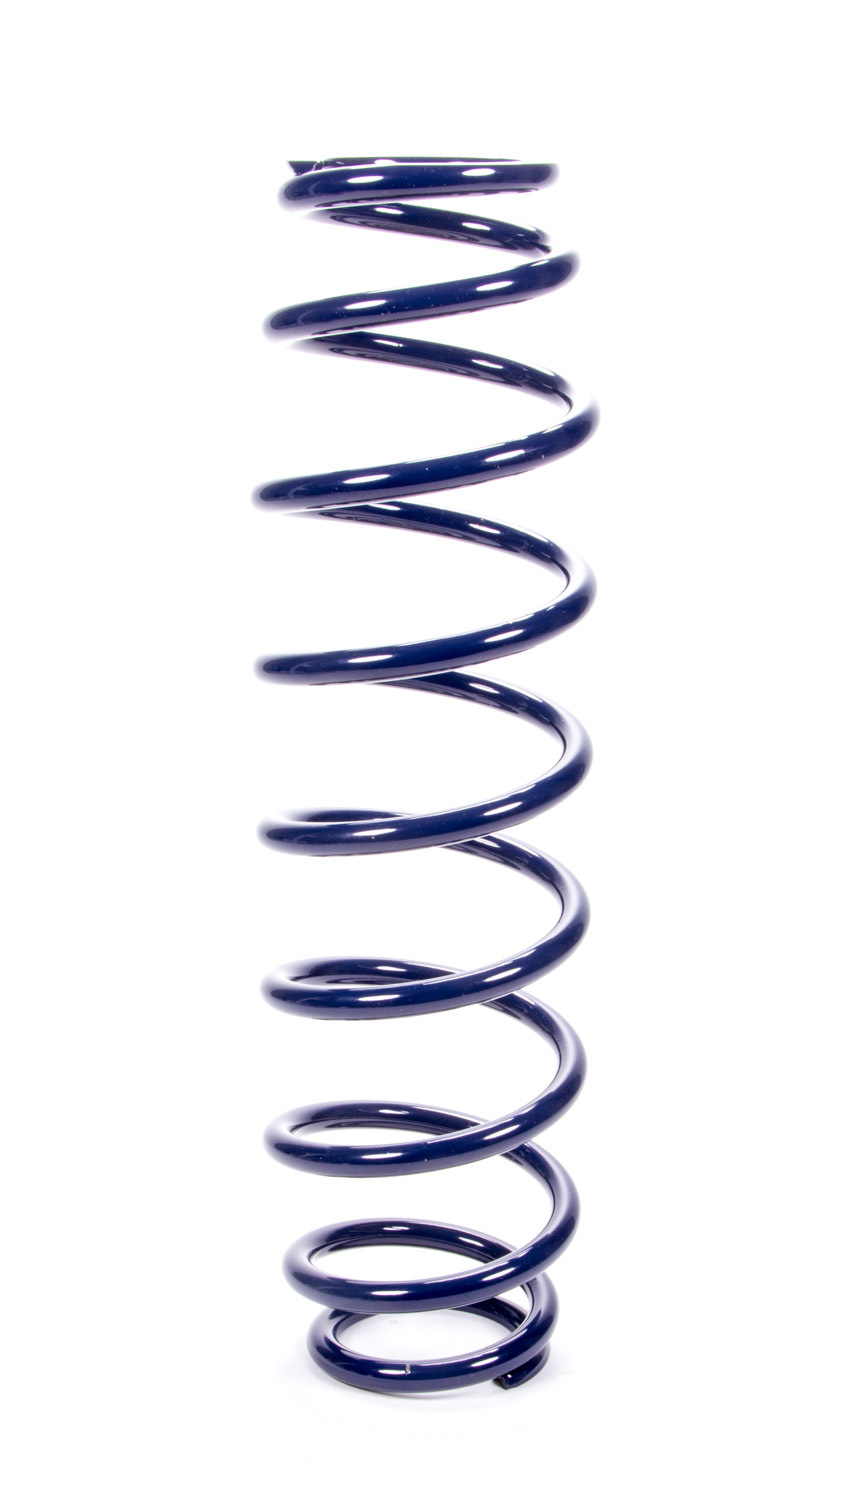 Hyperco 12B0325UHT Coil Spring, UHT Barrel, Coil-Over, 2.500 in ID, 12.000 in Length, 325 lb/in Spring Rate, Steel, Blue Powder Coat, Each